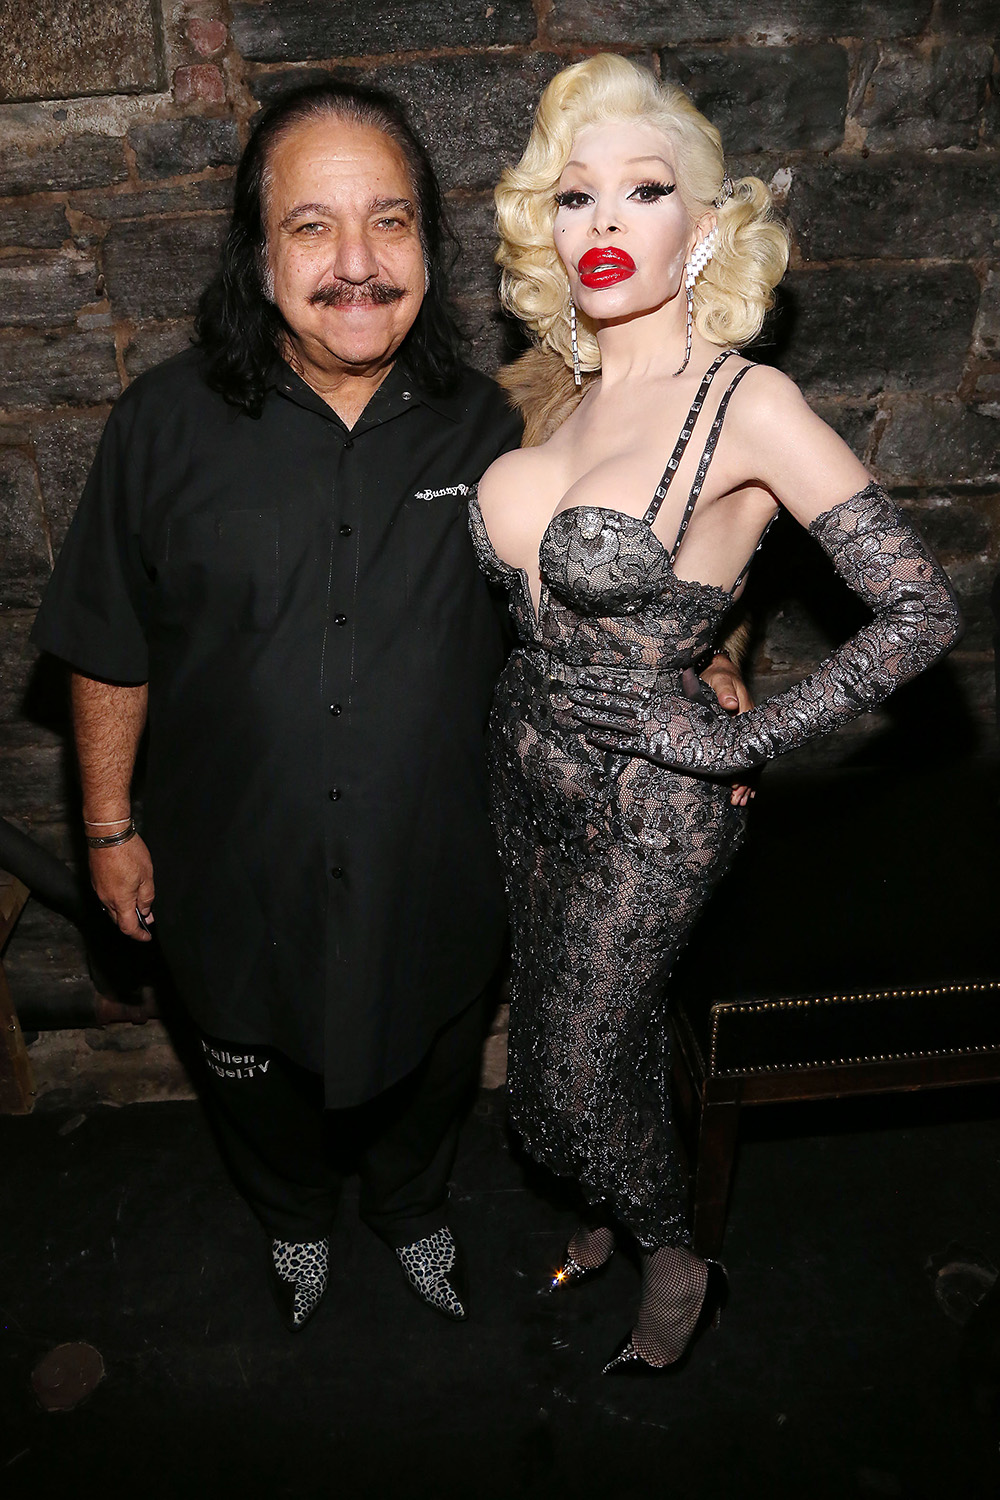 Ron Jeremy See Photos Of The Adult Film Star pic